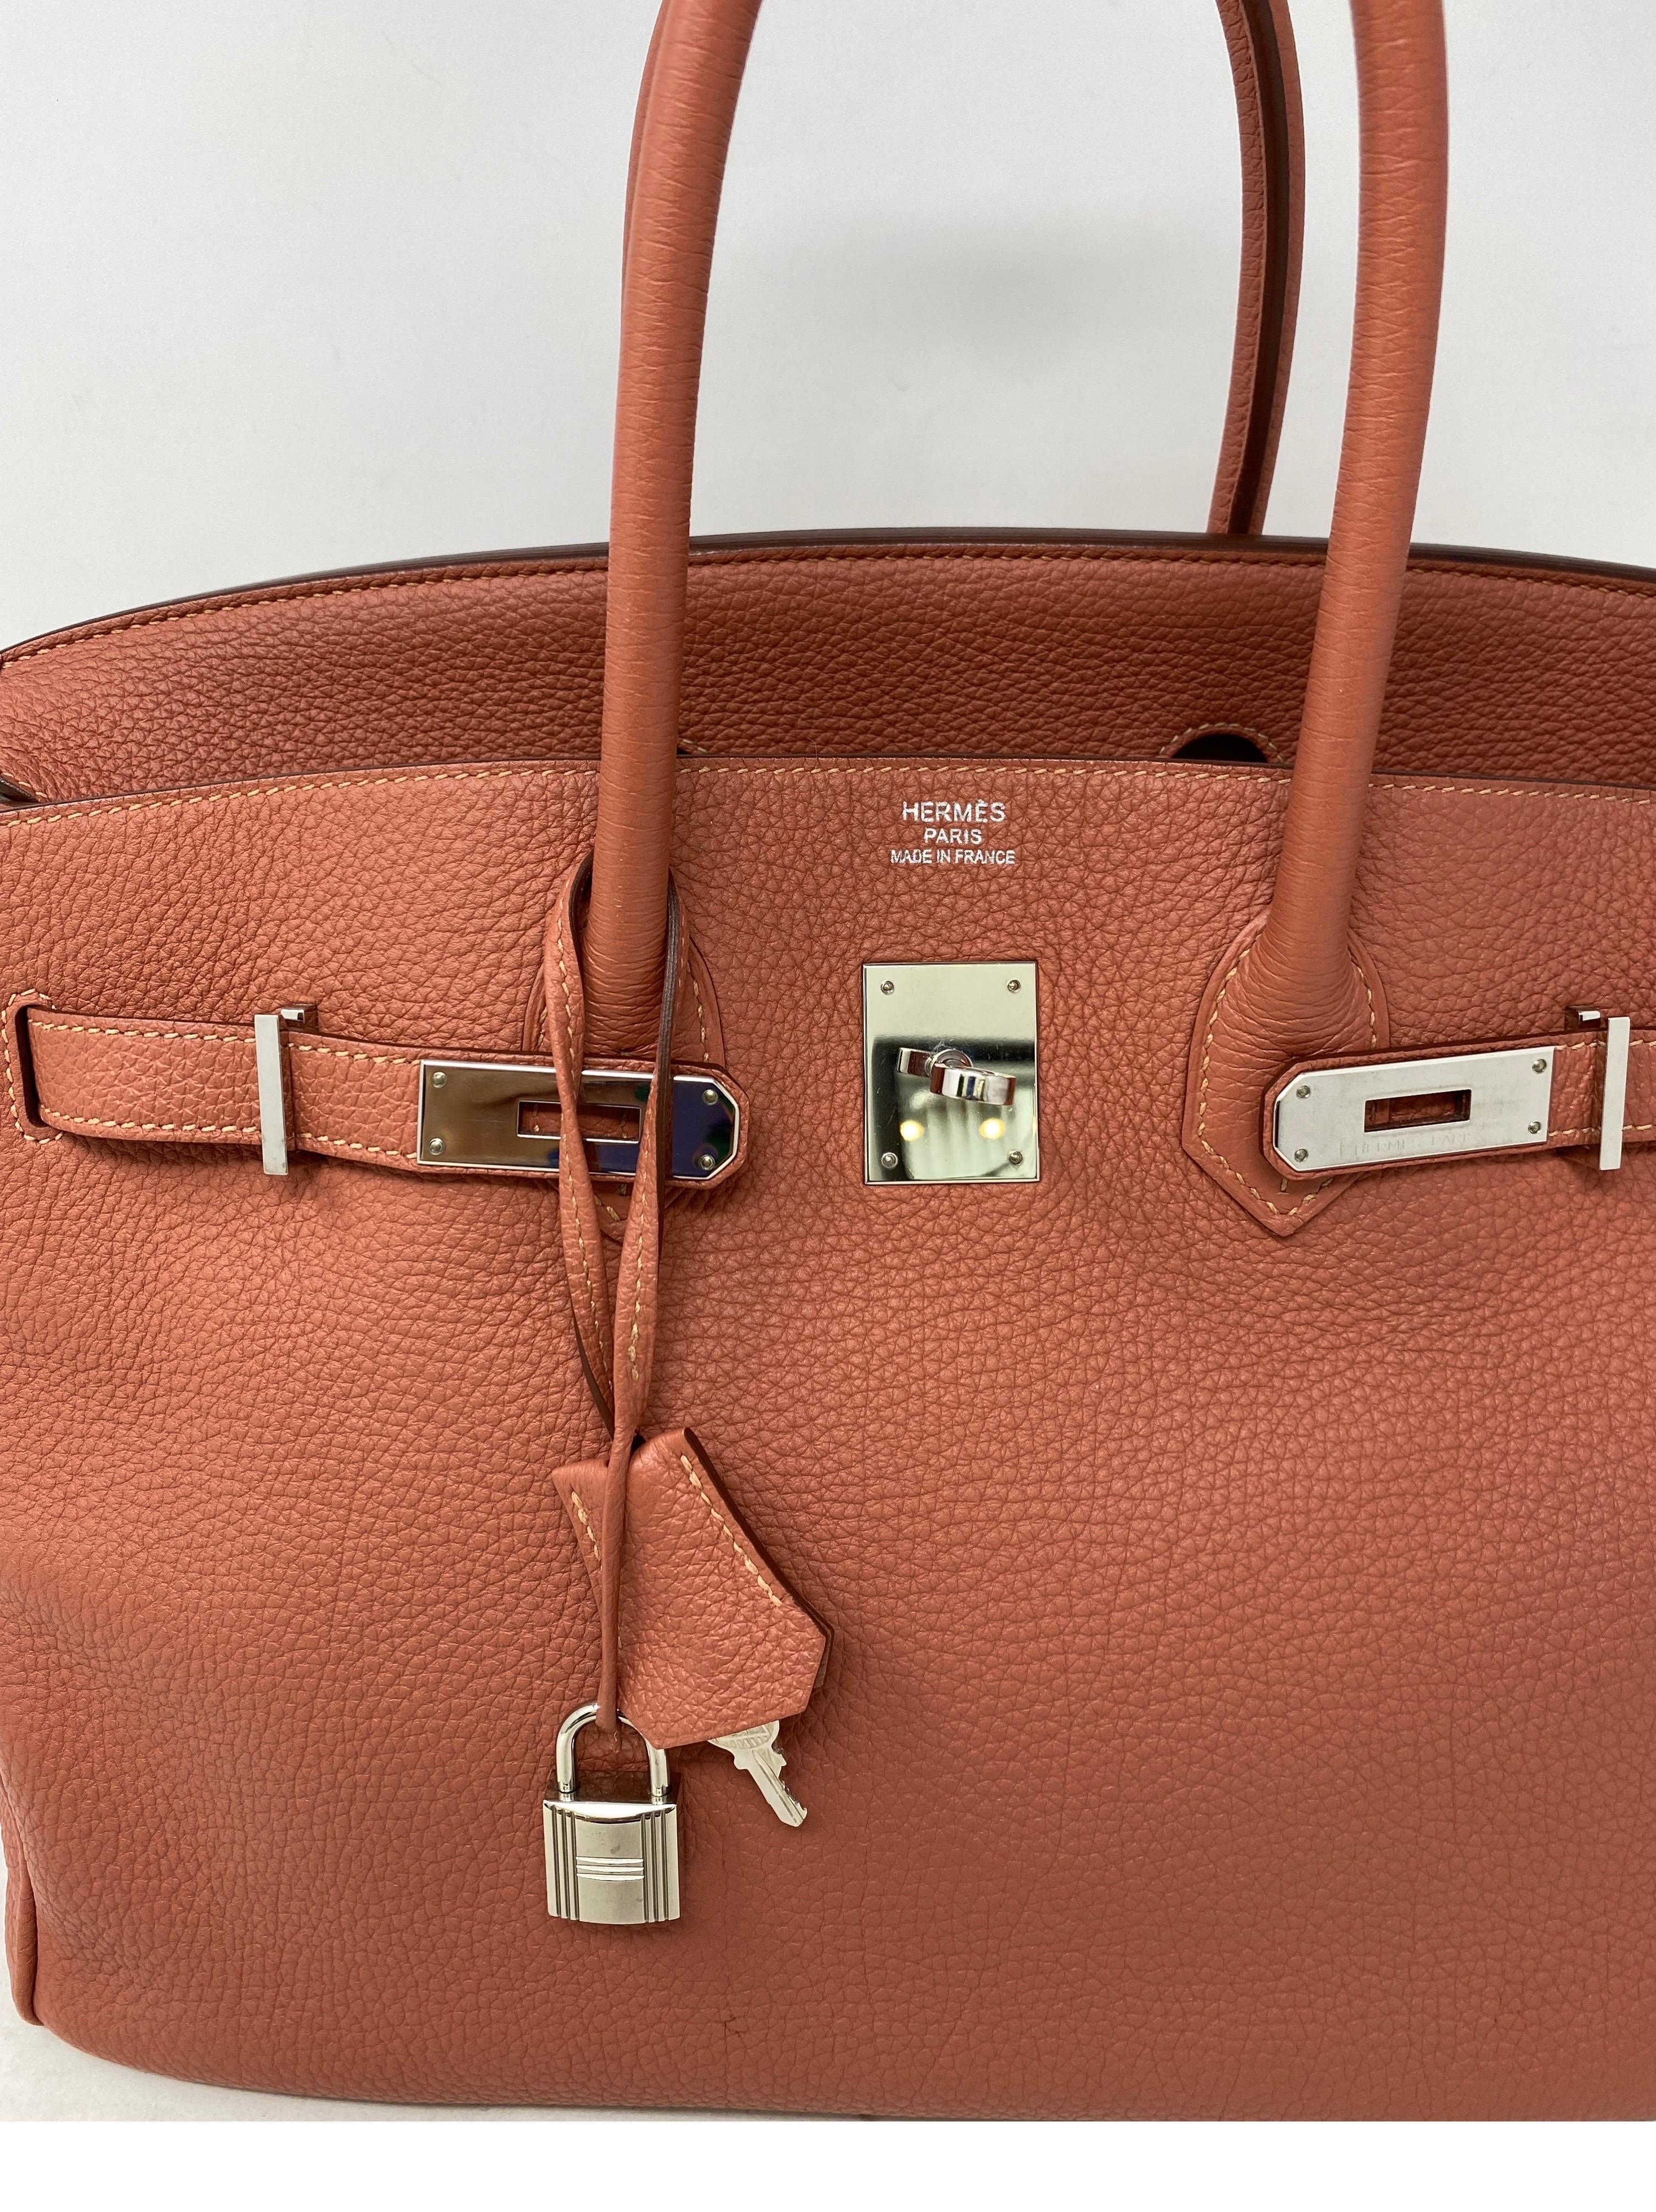 Hermes Birkin 35 Rose Tea Color Bag. Beautiful neutral light pink/ tan color. Excellent condition. Like new. Palladium hardware. Includes clochette, lock, keys and dust cover. Guaranteed authentic. 